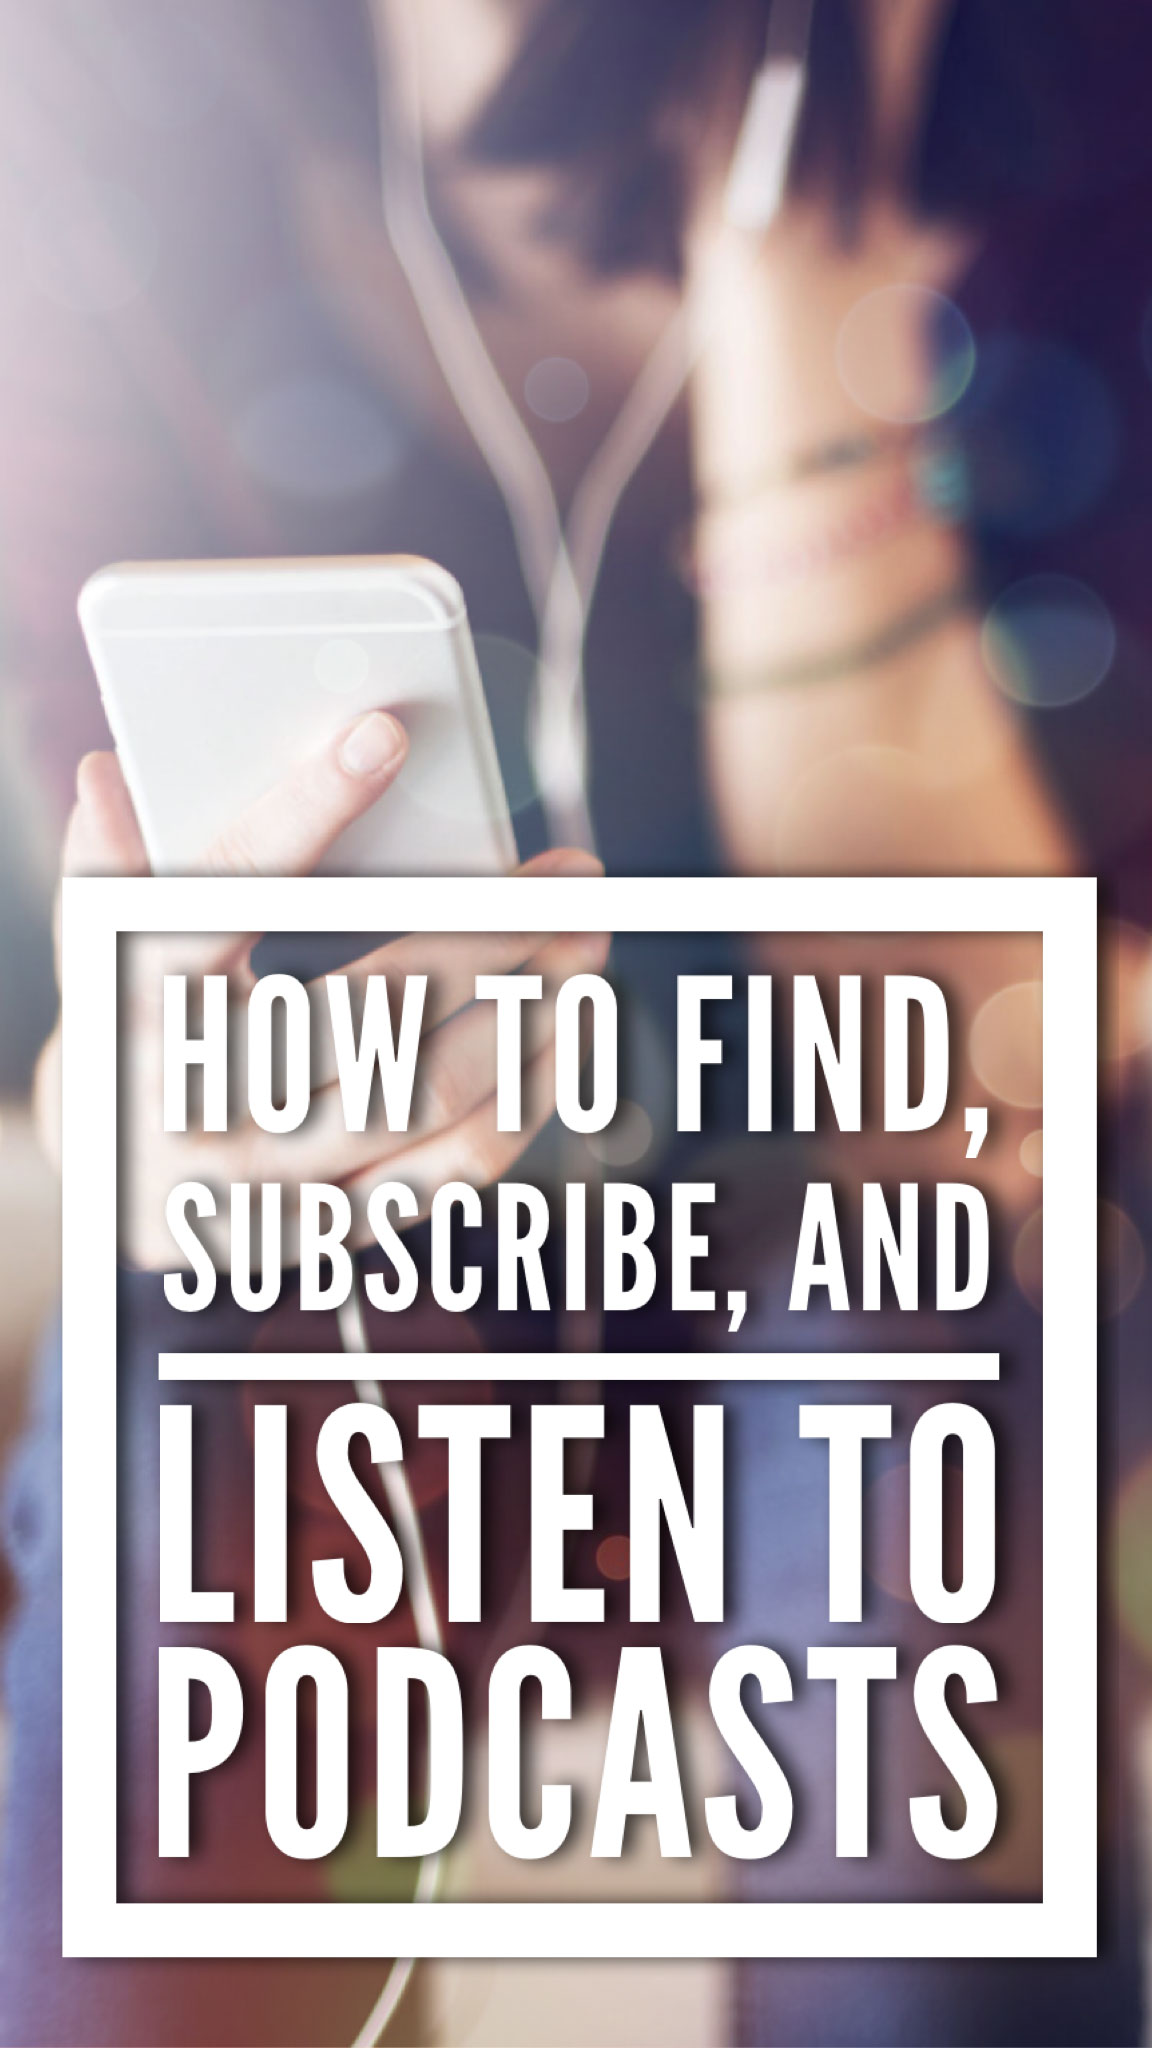 How to Find, Subscribe, and Listen to Podcasts